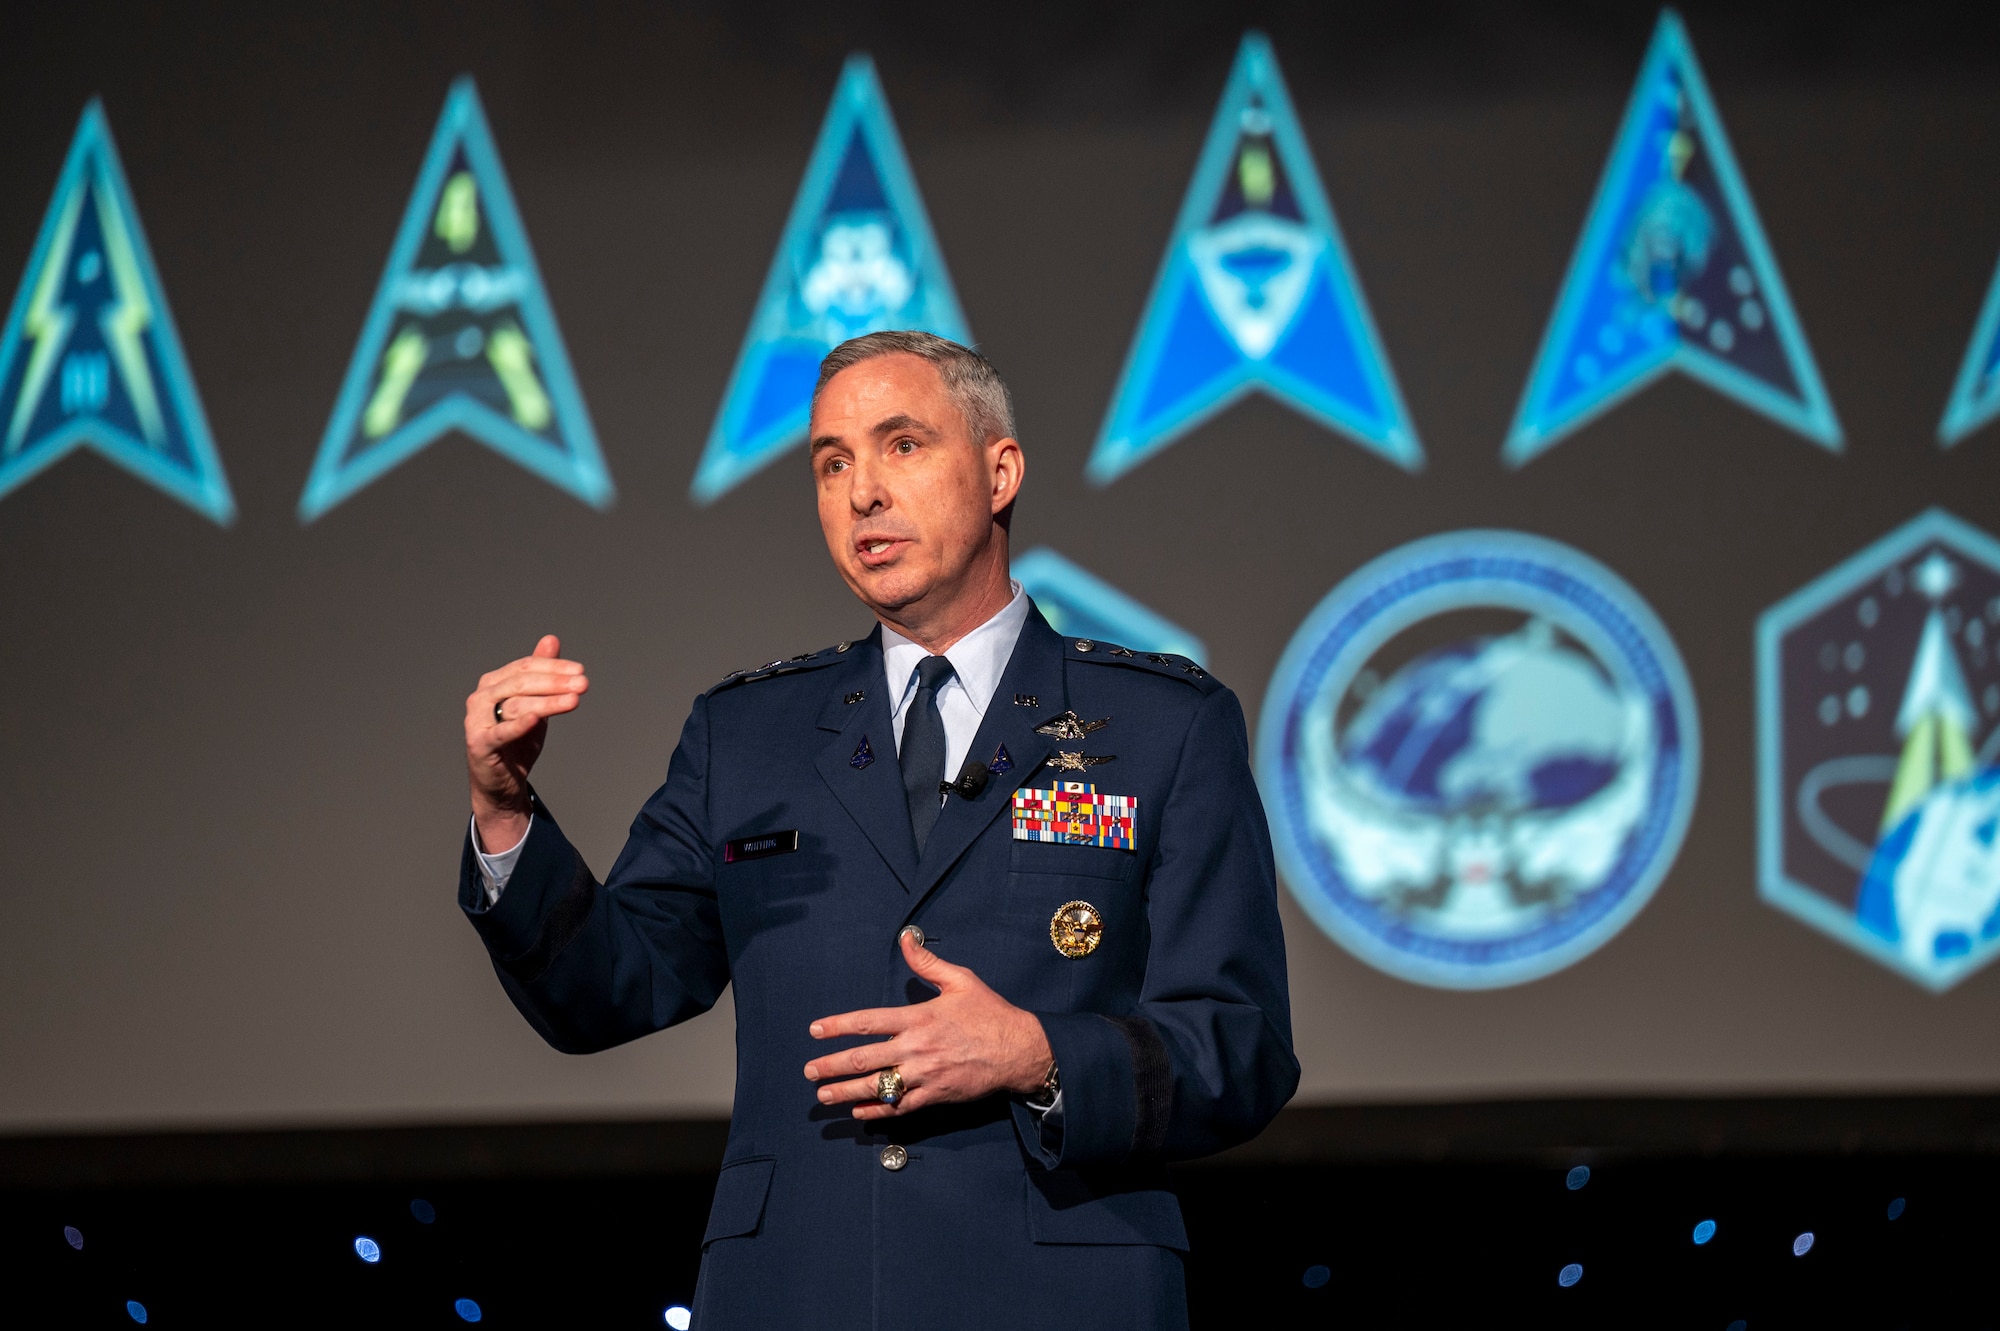 U.S. Space Force Lt. Gen. Stephen N. Whiting, Space Operations Command commander, delivered “The Way We Win” keynote during the 38th Space Symposium at the Broadmoor, Colorado Springs, Colo., April 20, 2023. Space Symposium attendees represent all sectors of the space community from multiple spacefaring nations; space agencies; commercial space businesses and associated subcontractors; military, national security and intelligence organizations; cyber security organizations to partner in the space domain. (US. Space Force photo by SSgt Jose A. Rodriguez Jr)